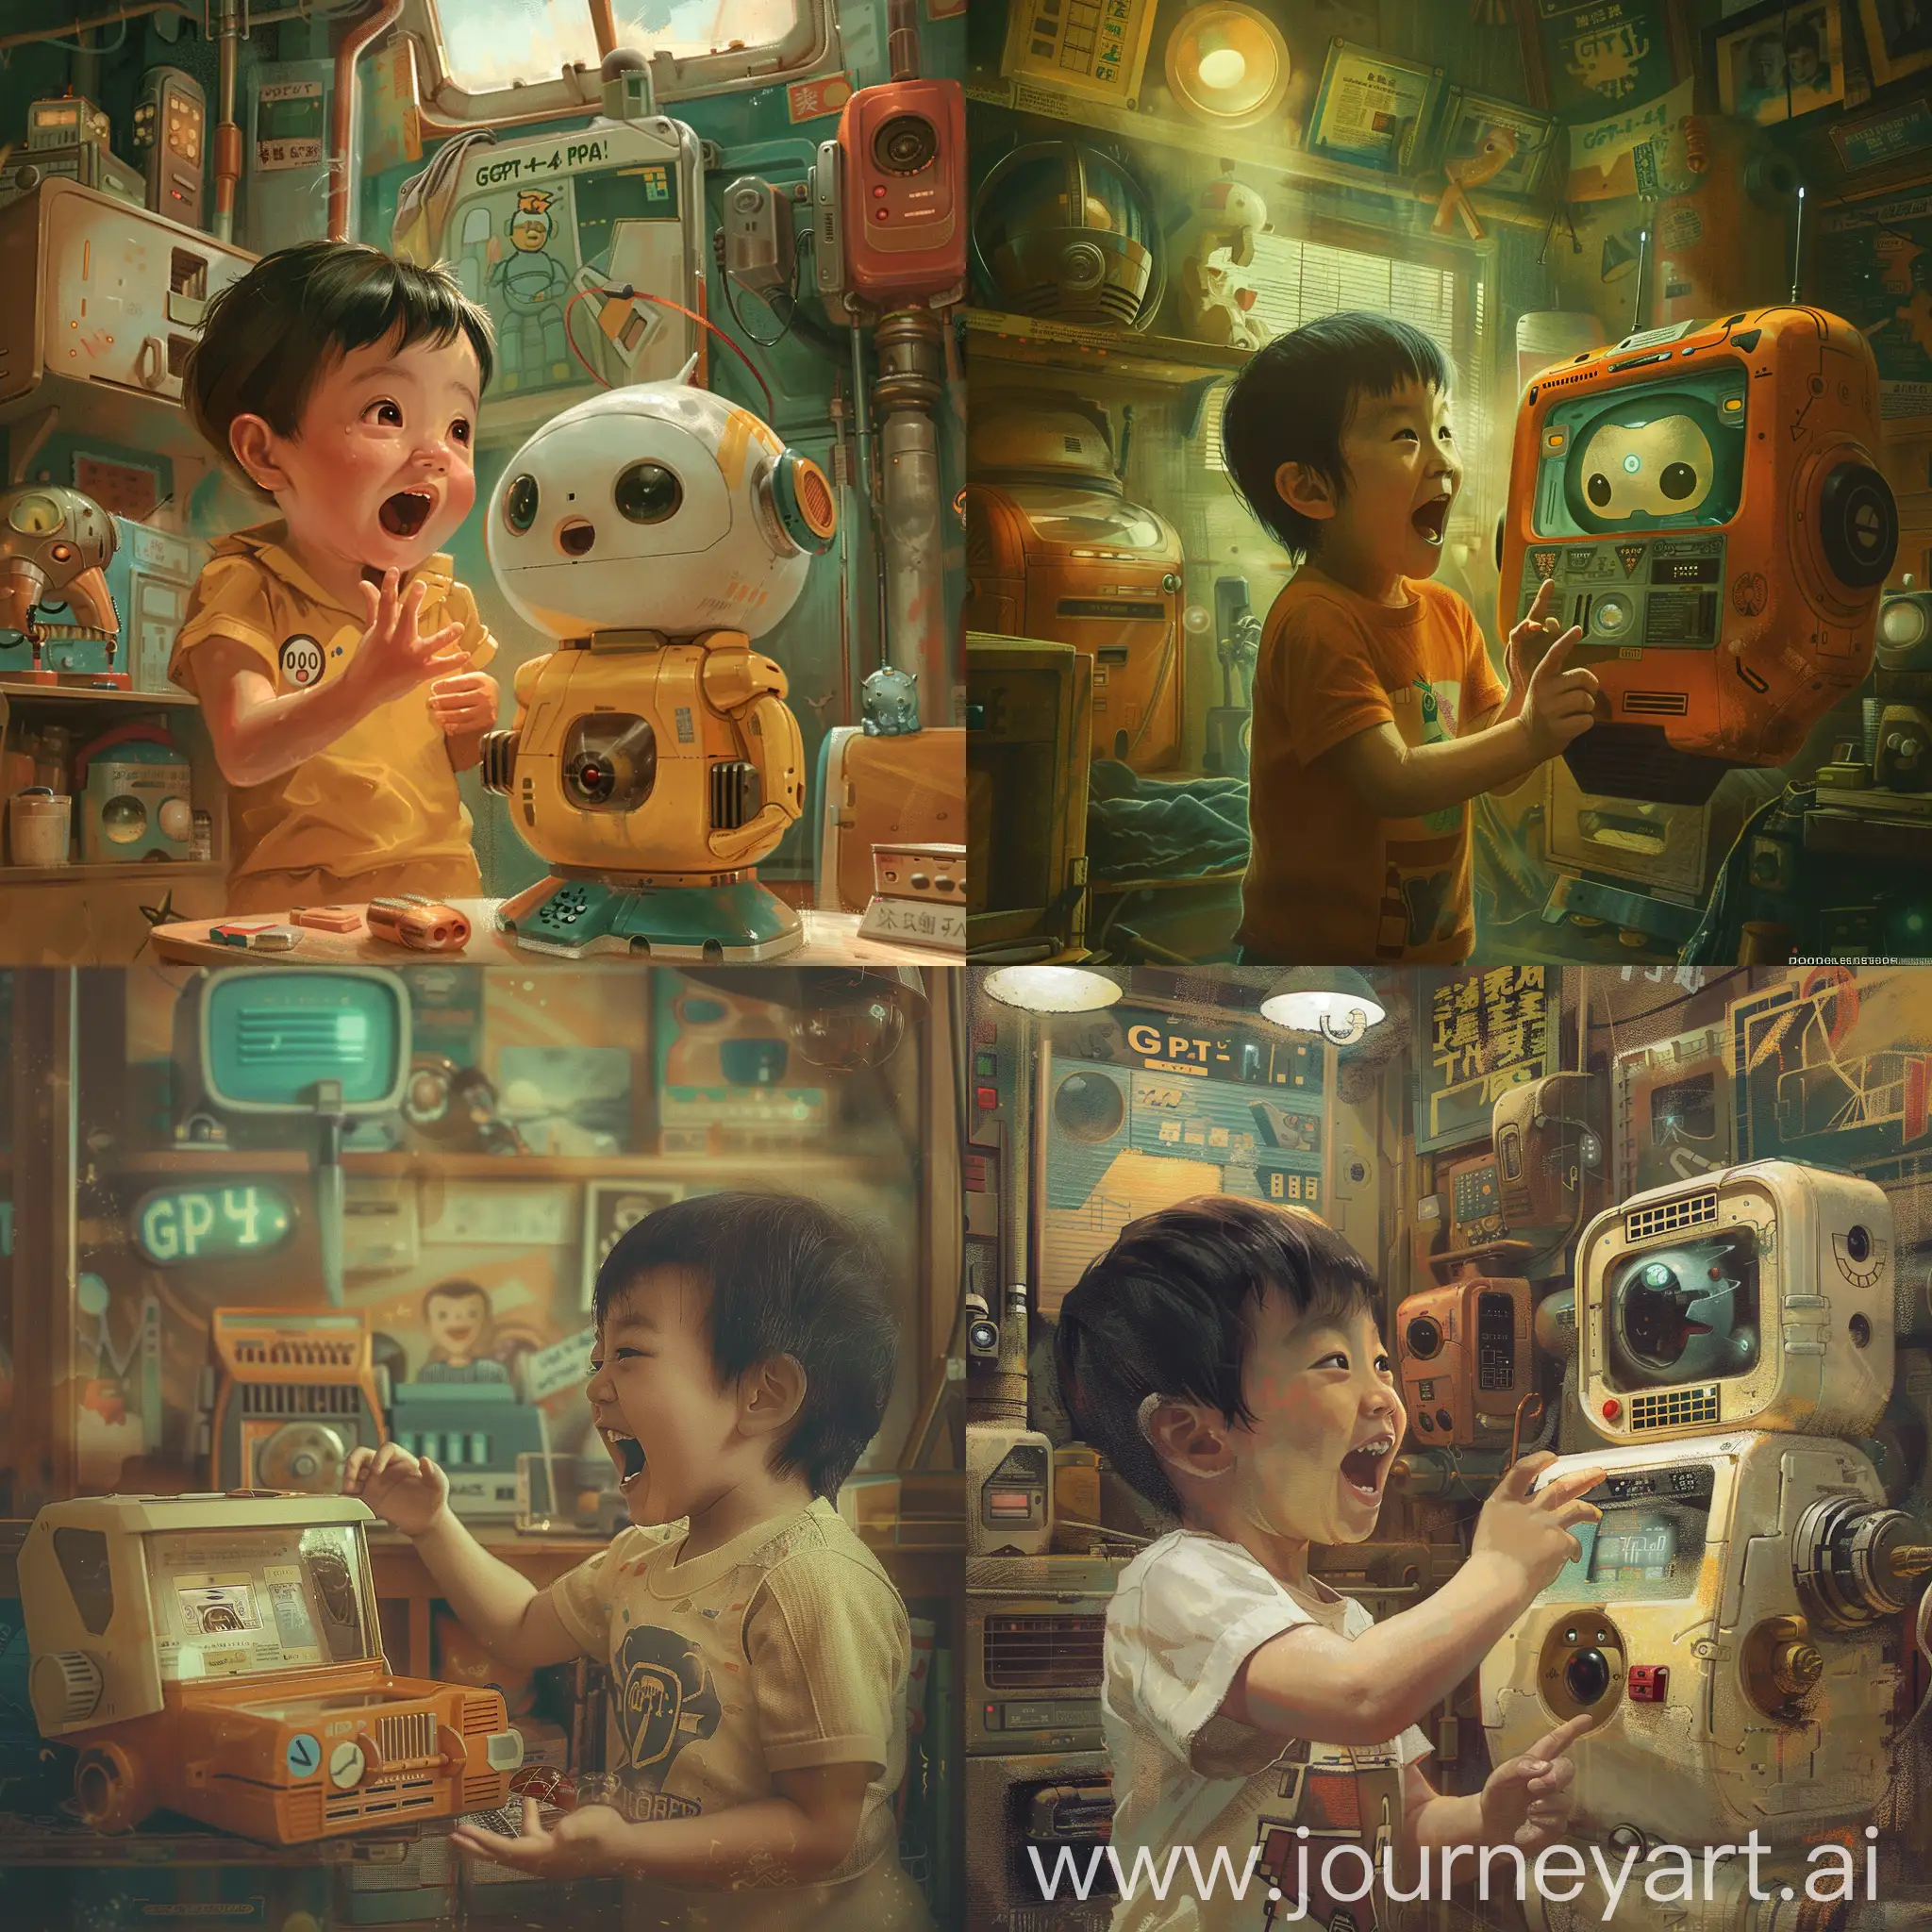 Curious-Child-with-GPT4-Robot-Toy-in-Nostalgic-SciFi-Setting